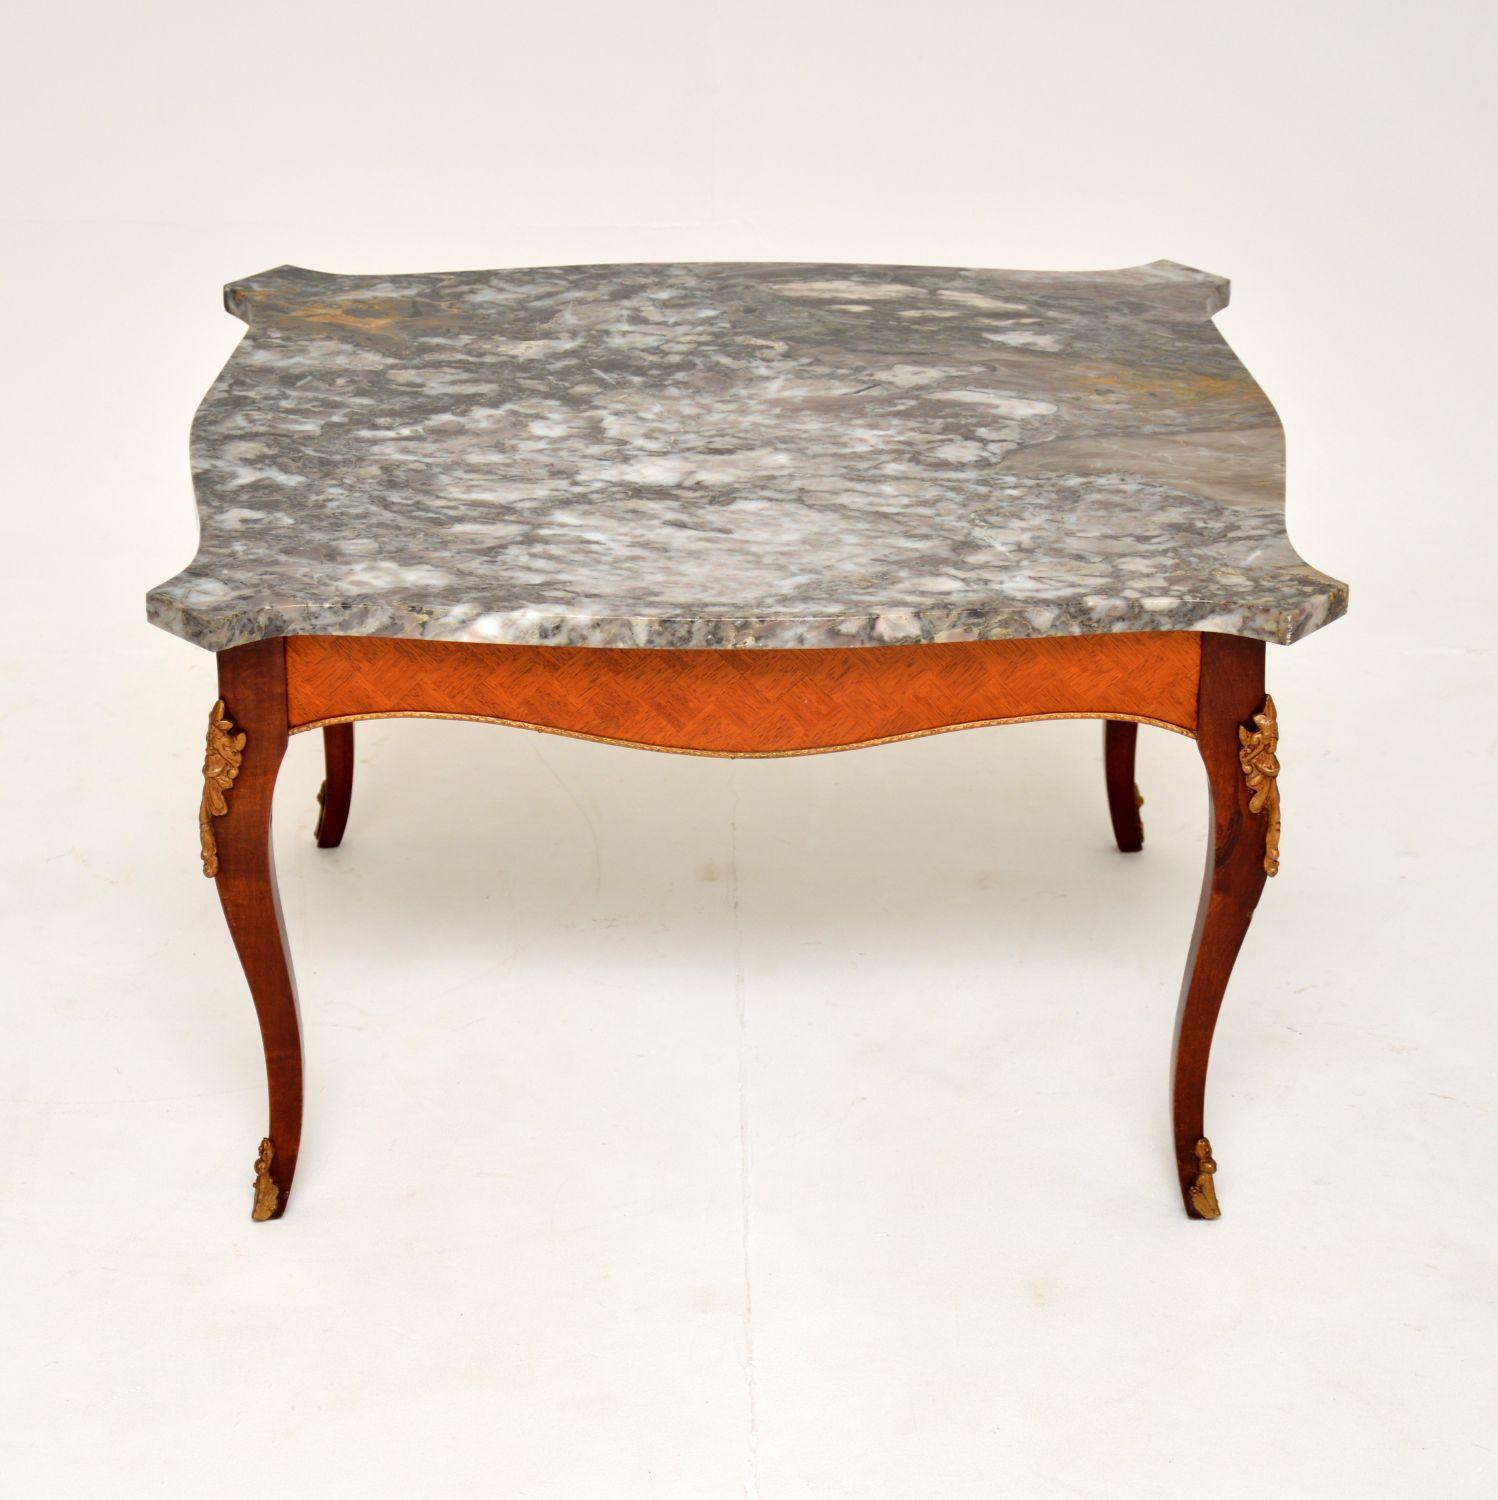 A beautiful antique marble top coffee table. This was made in France, it dates from around the 1920-30’s.

It is of excellent quality, the frame has beautiful veneers on the sides and high quality gilt metal mounts. the marble top has stunning